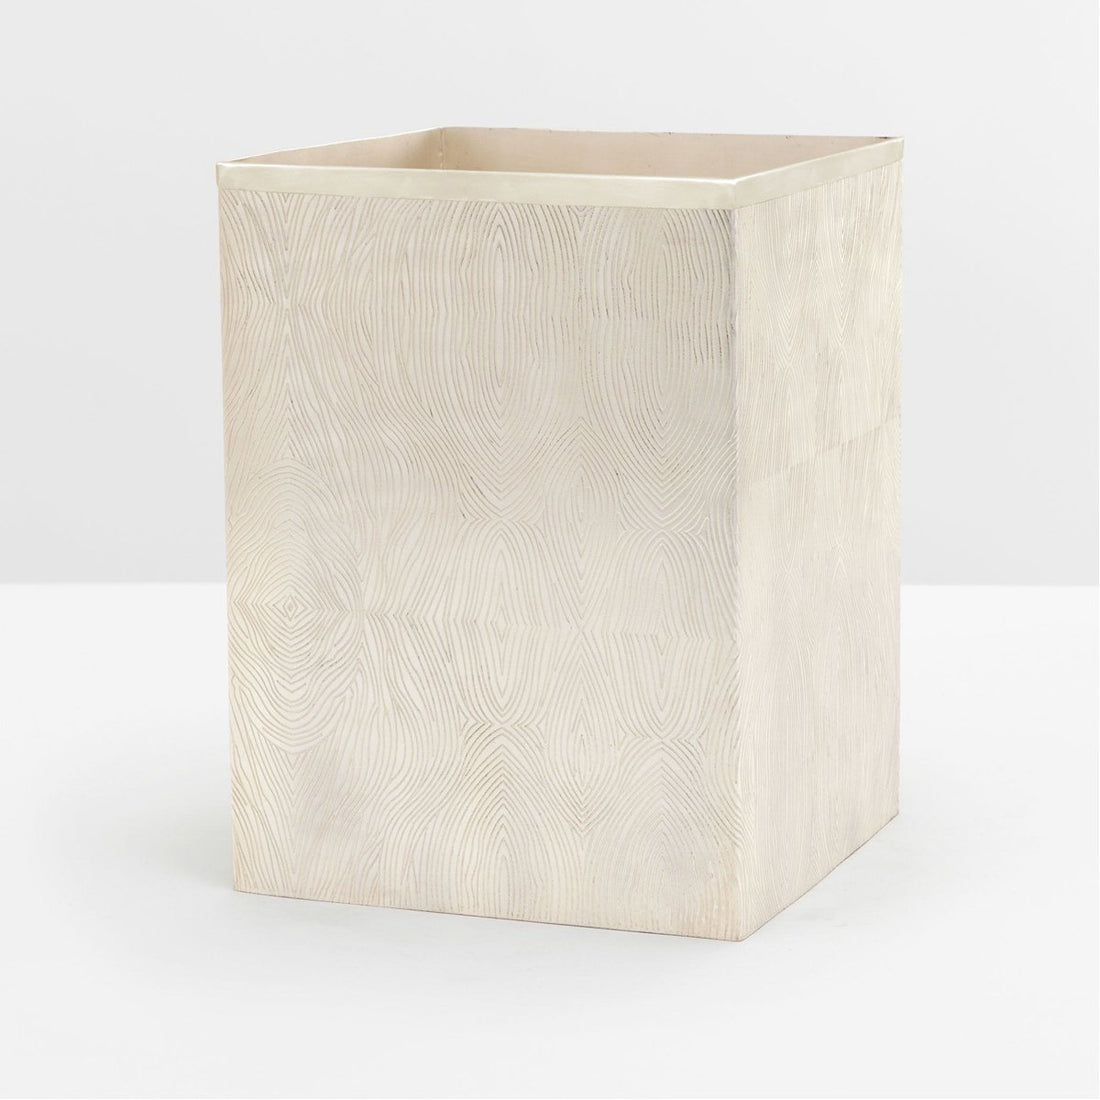 Pigeon and Poodle Humbolt Square Wastebasket, Straight